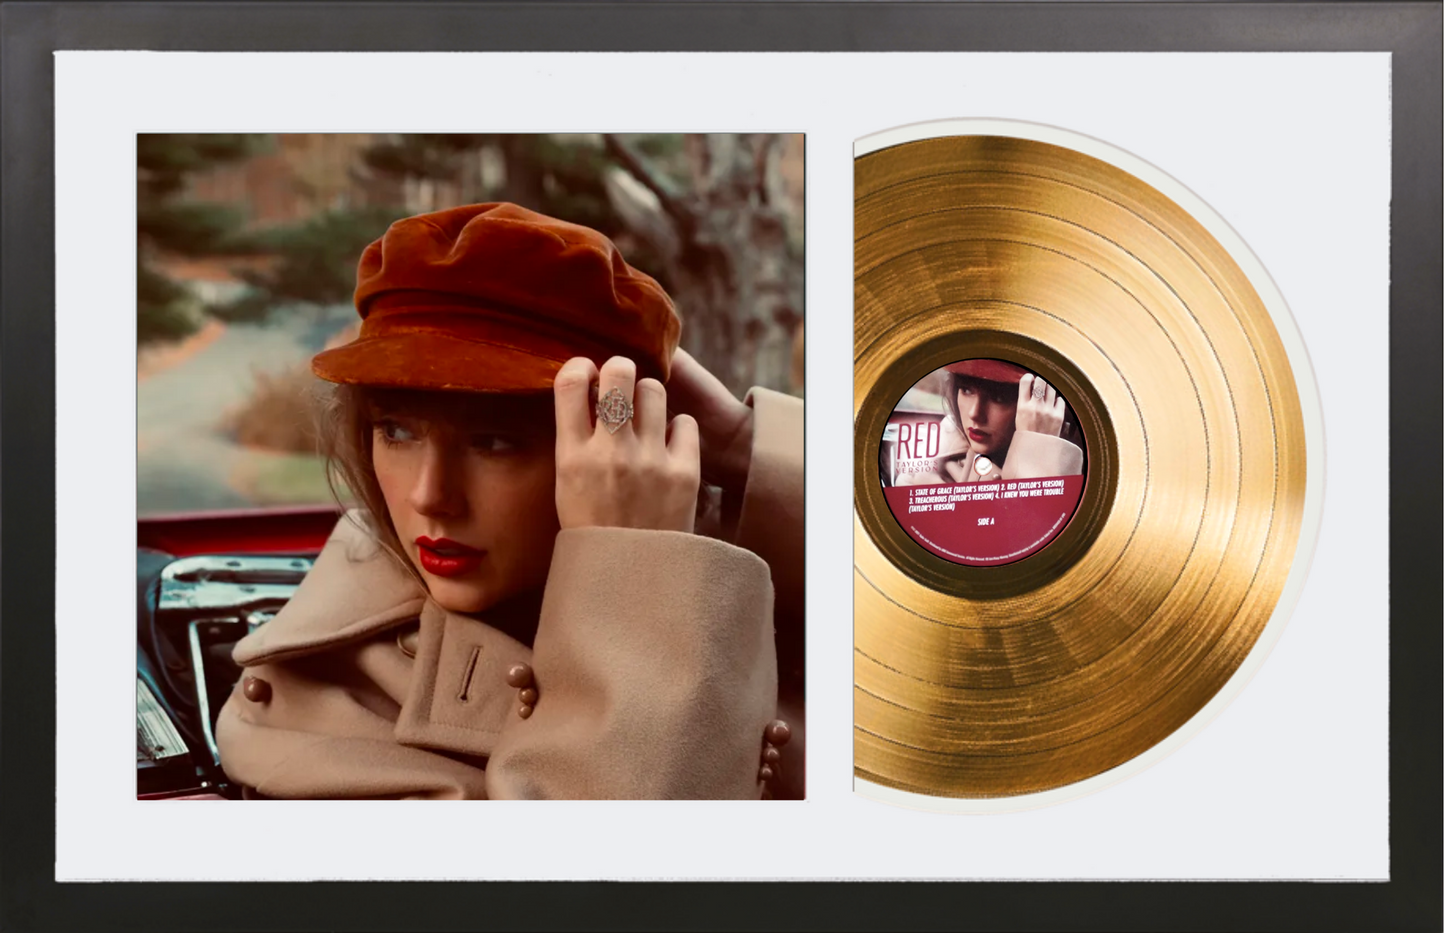 Red (Taylor's Version) Limited Edition Red Vinyl: CDs & Vinyl 